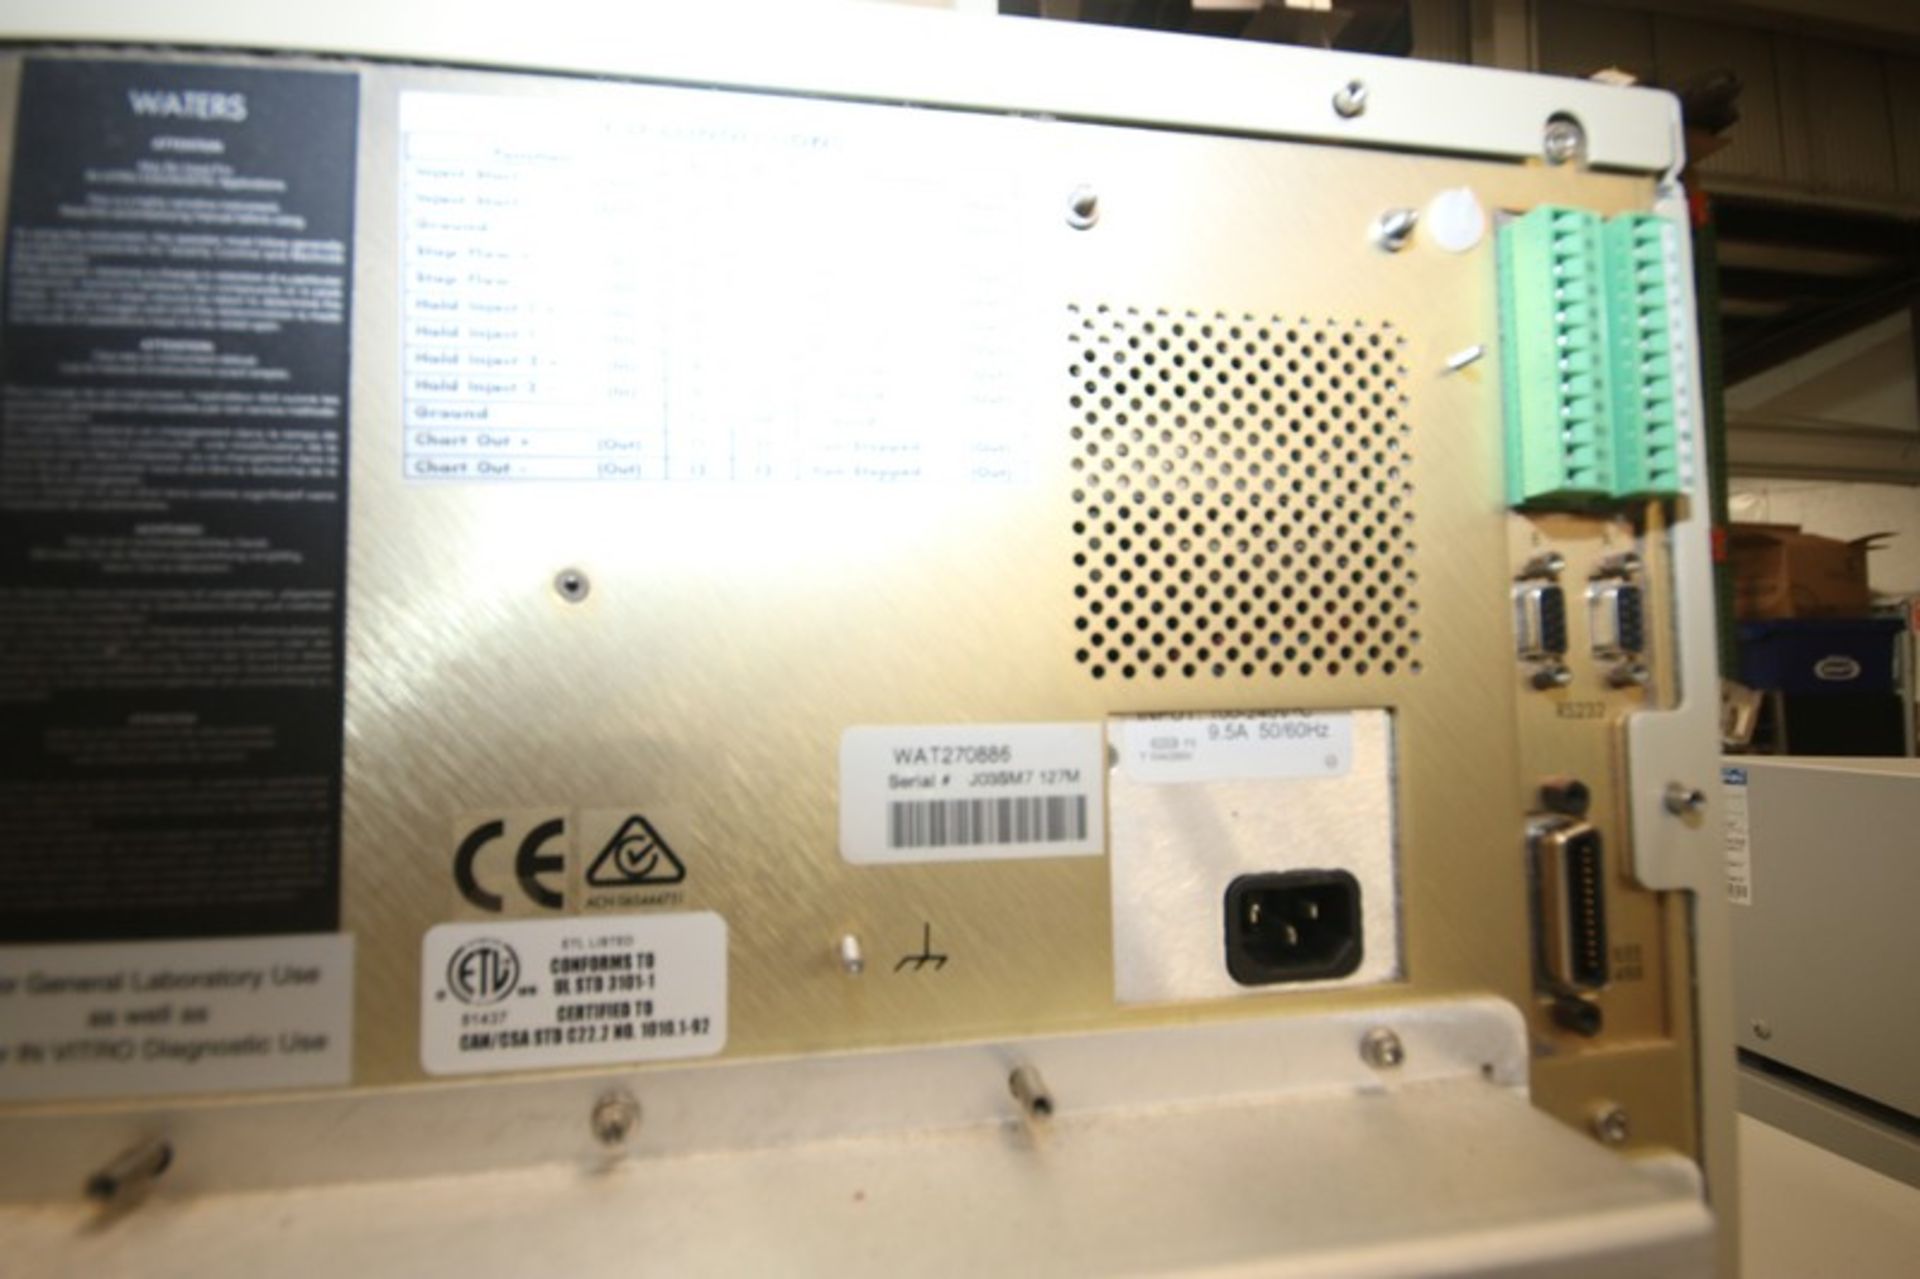 Alliance Waters 2695 HPLC System, S/N J03SM7 127M, with Separations Modules & Other Components, - Image 8 of 9